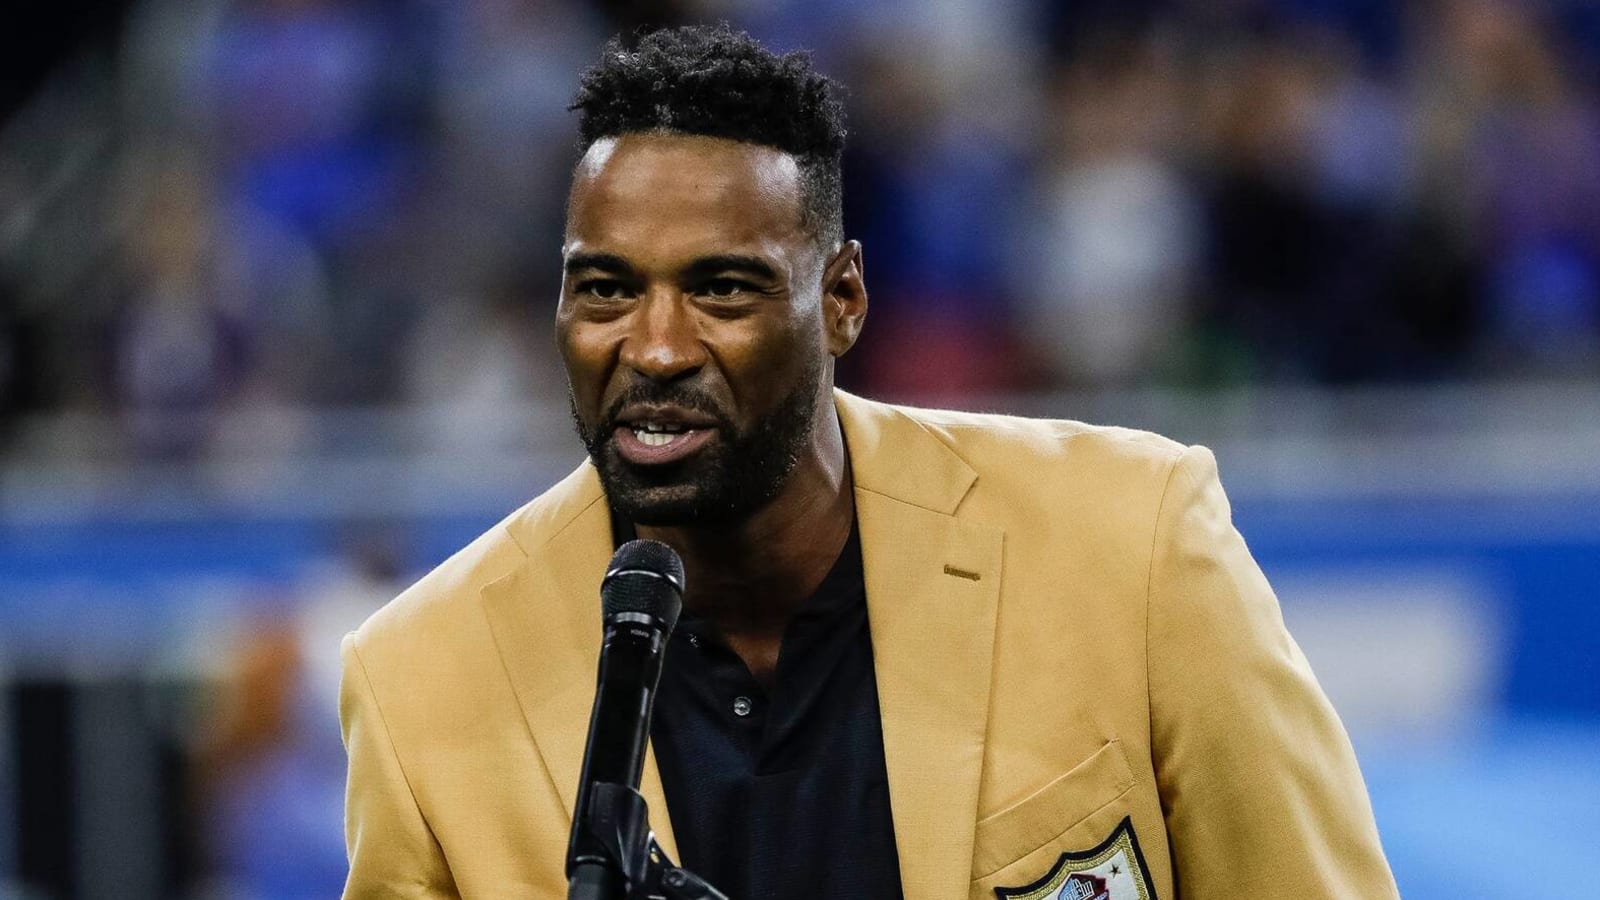 Calvin Johnson shares where things stand between him and Lions